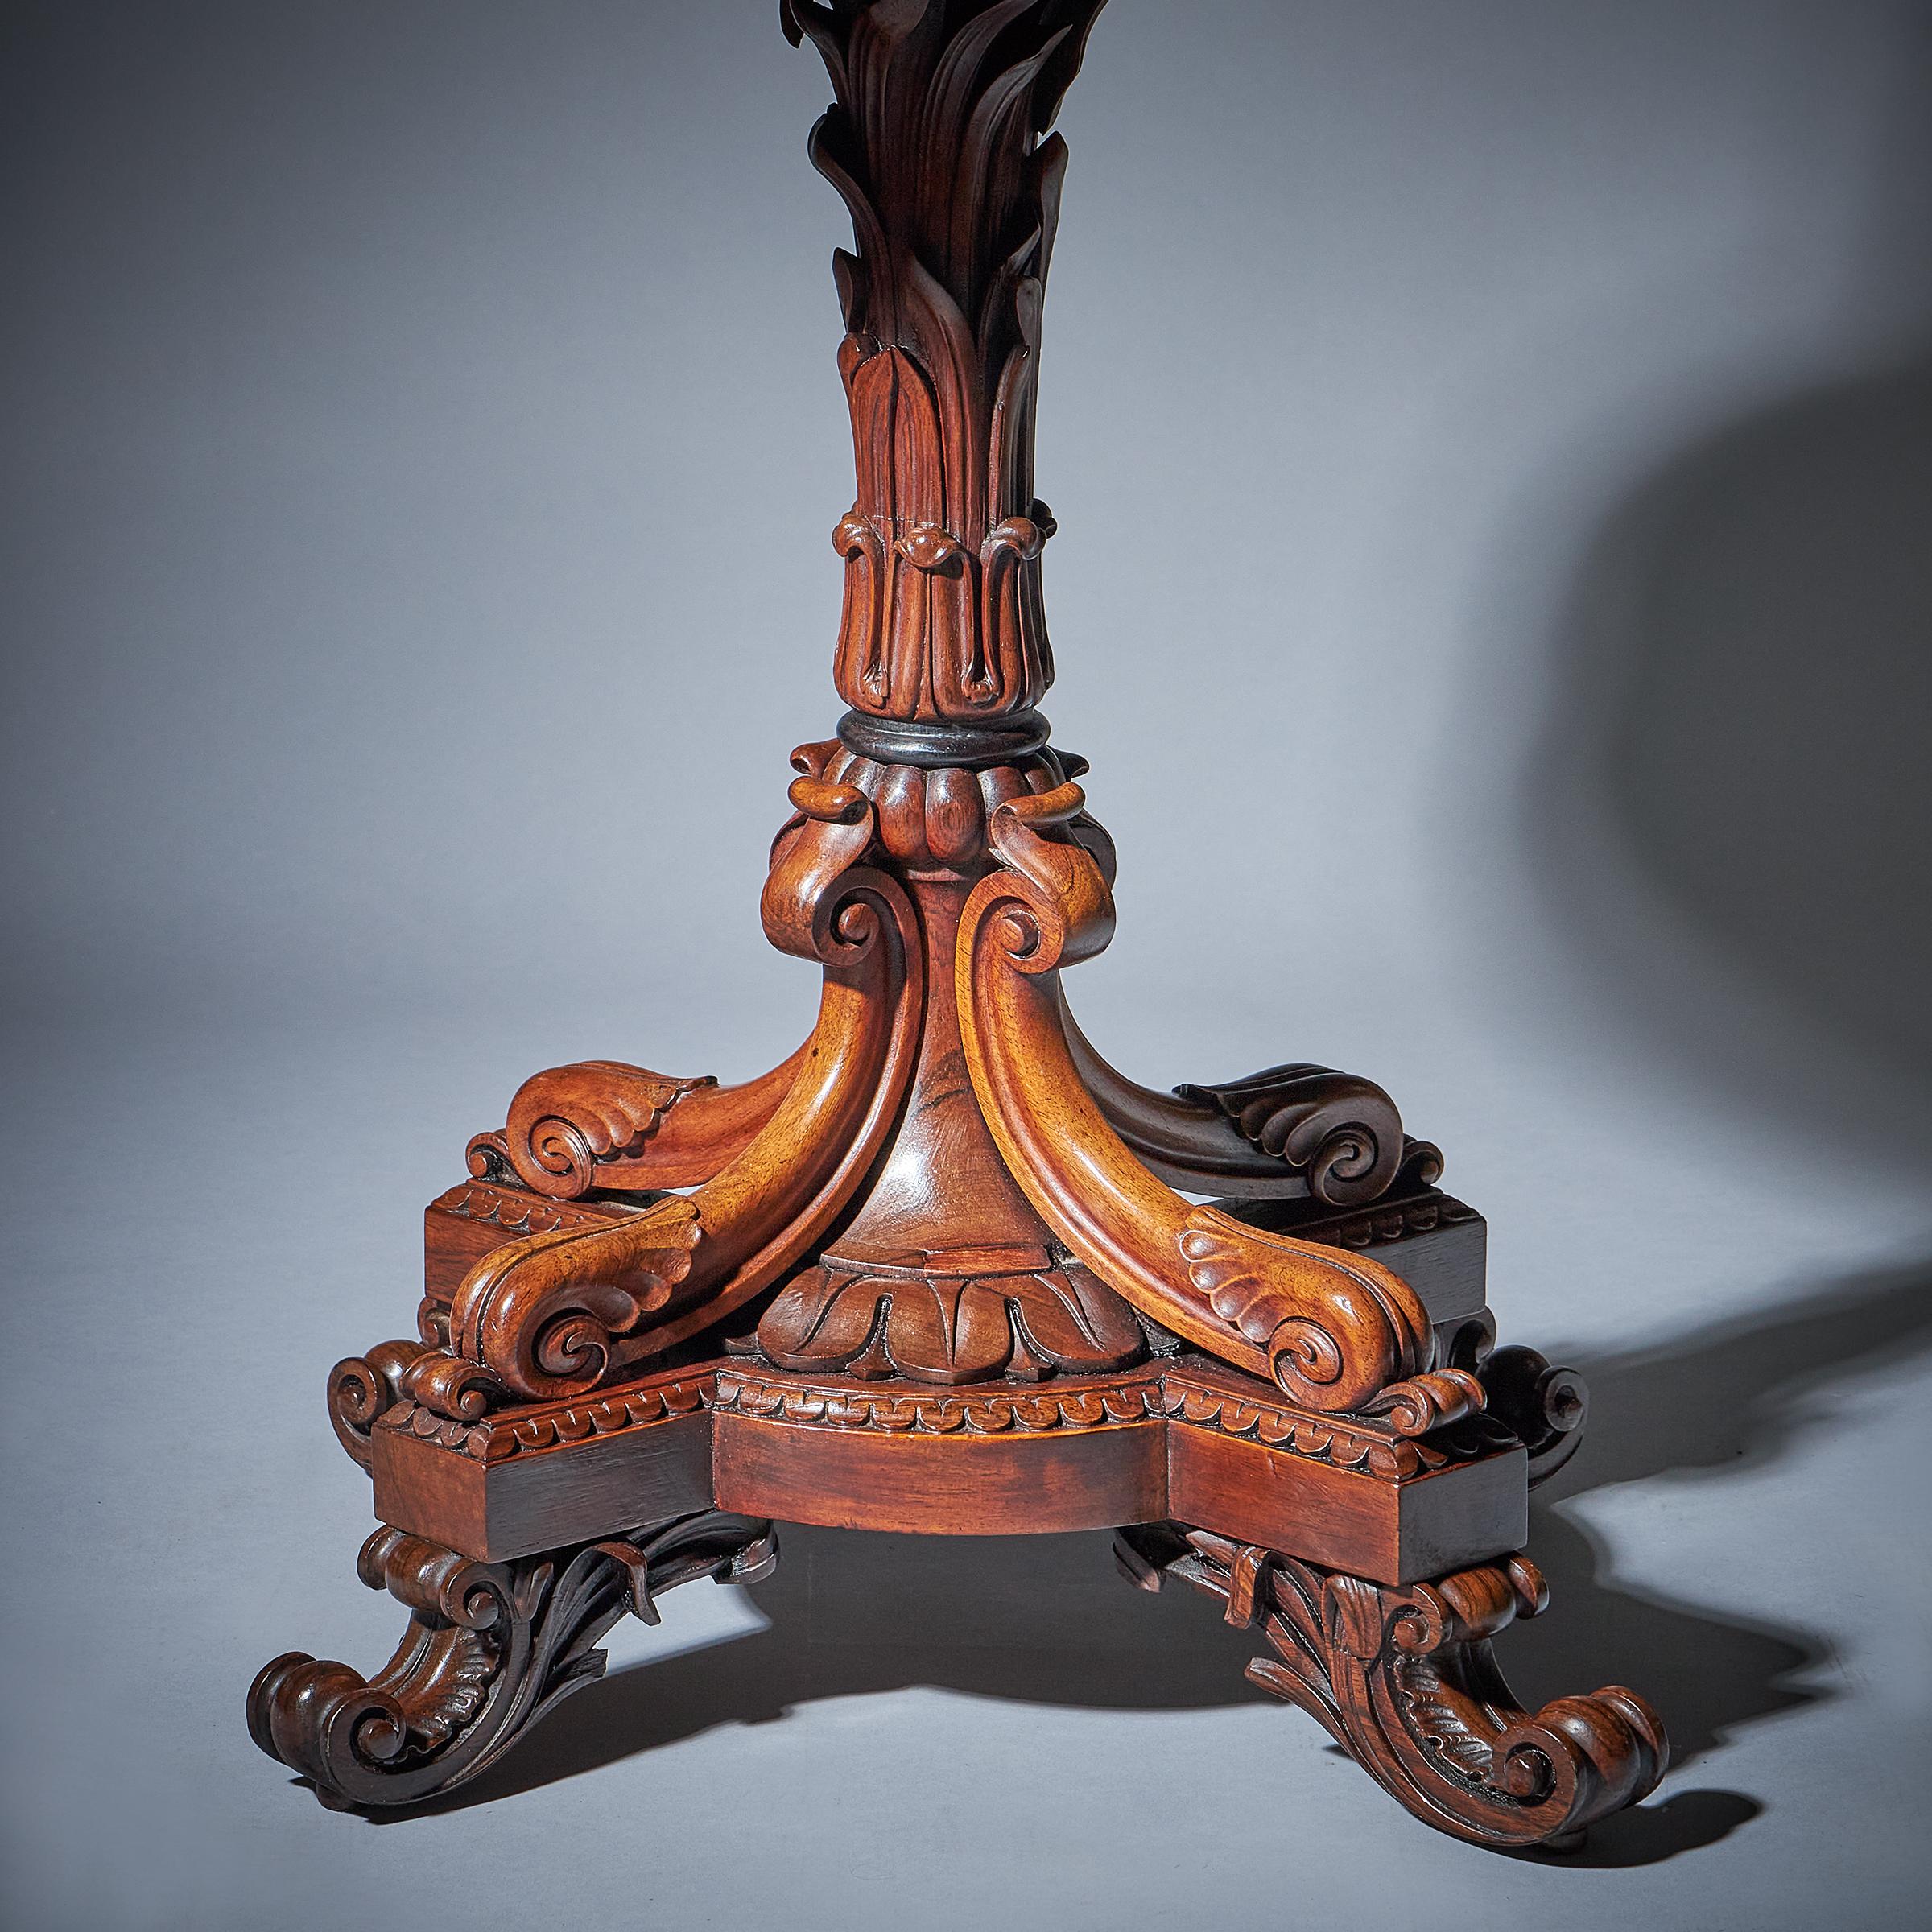 The stepped two-stage upper part with recessed shelving and leather spine triple book divisions beneath the original tooled leather top. The elaborately carved base with quadruple leafing scrollwork supports and branching stem on a circular base